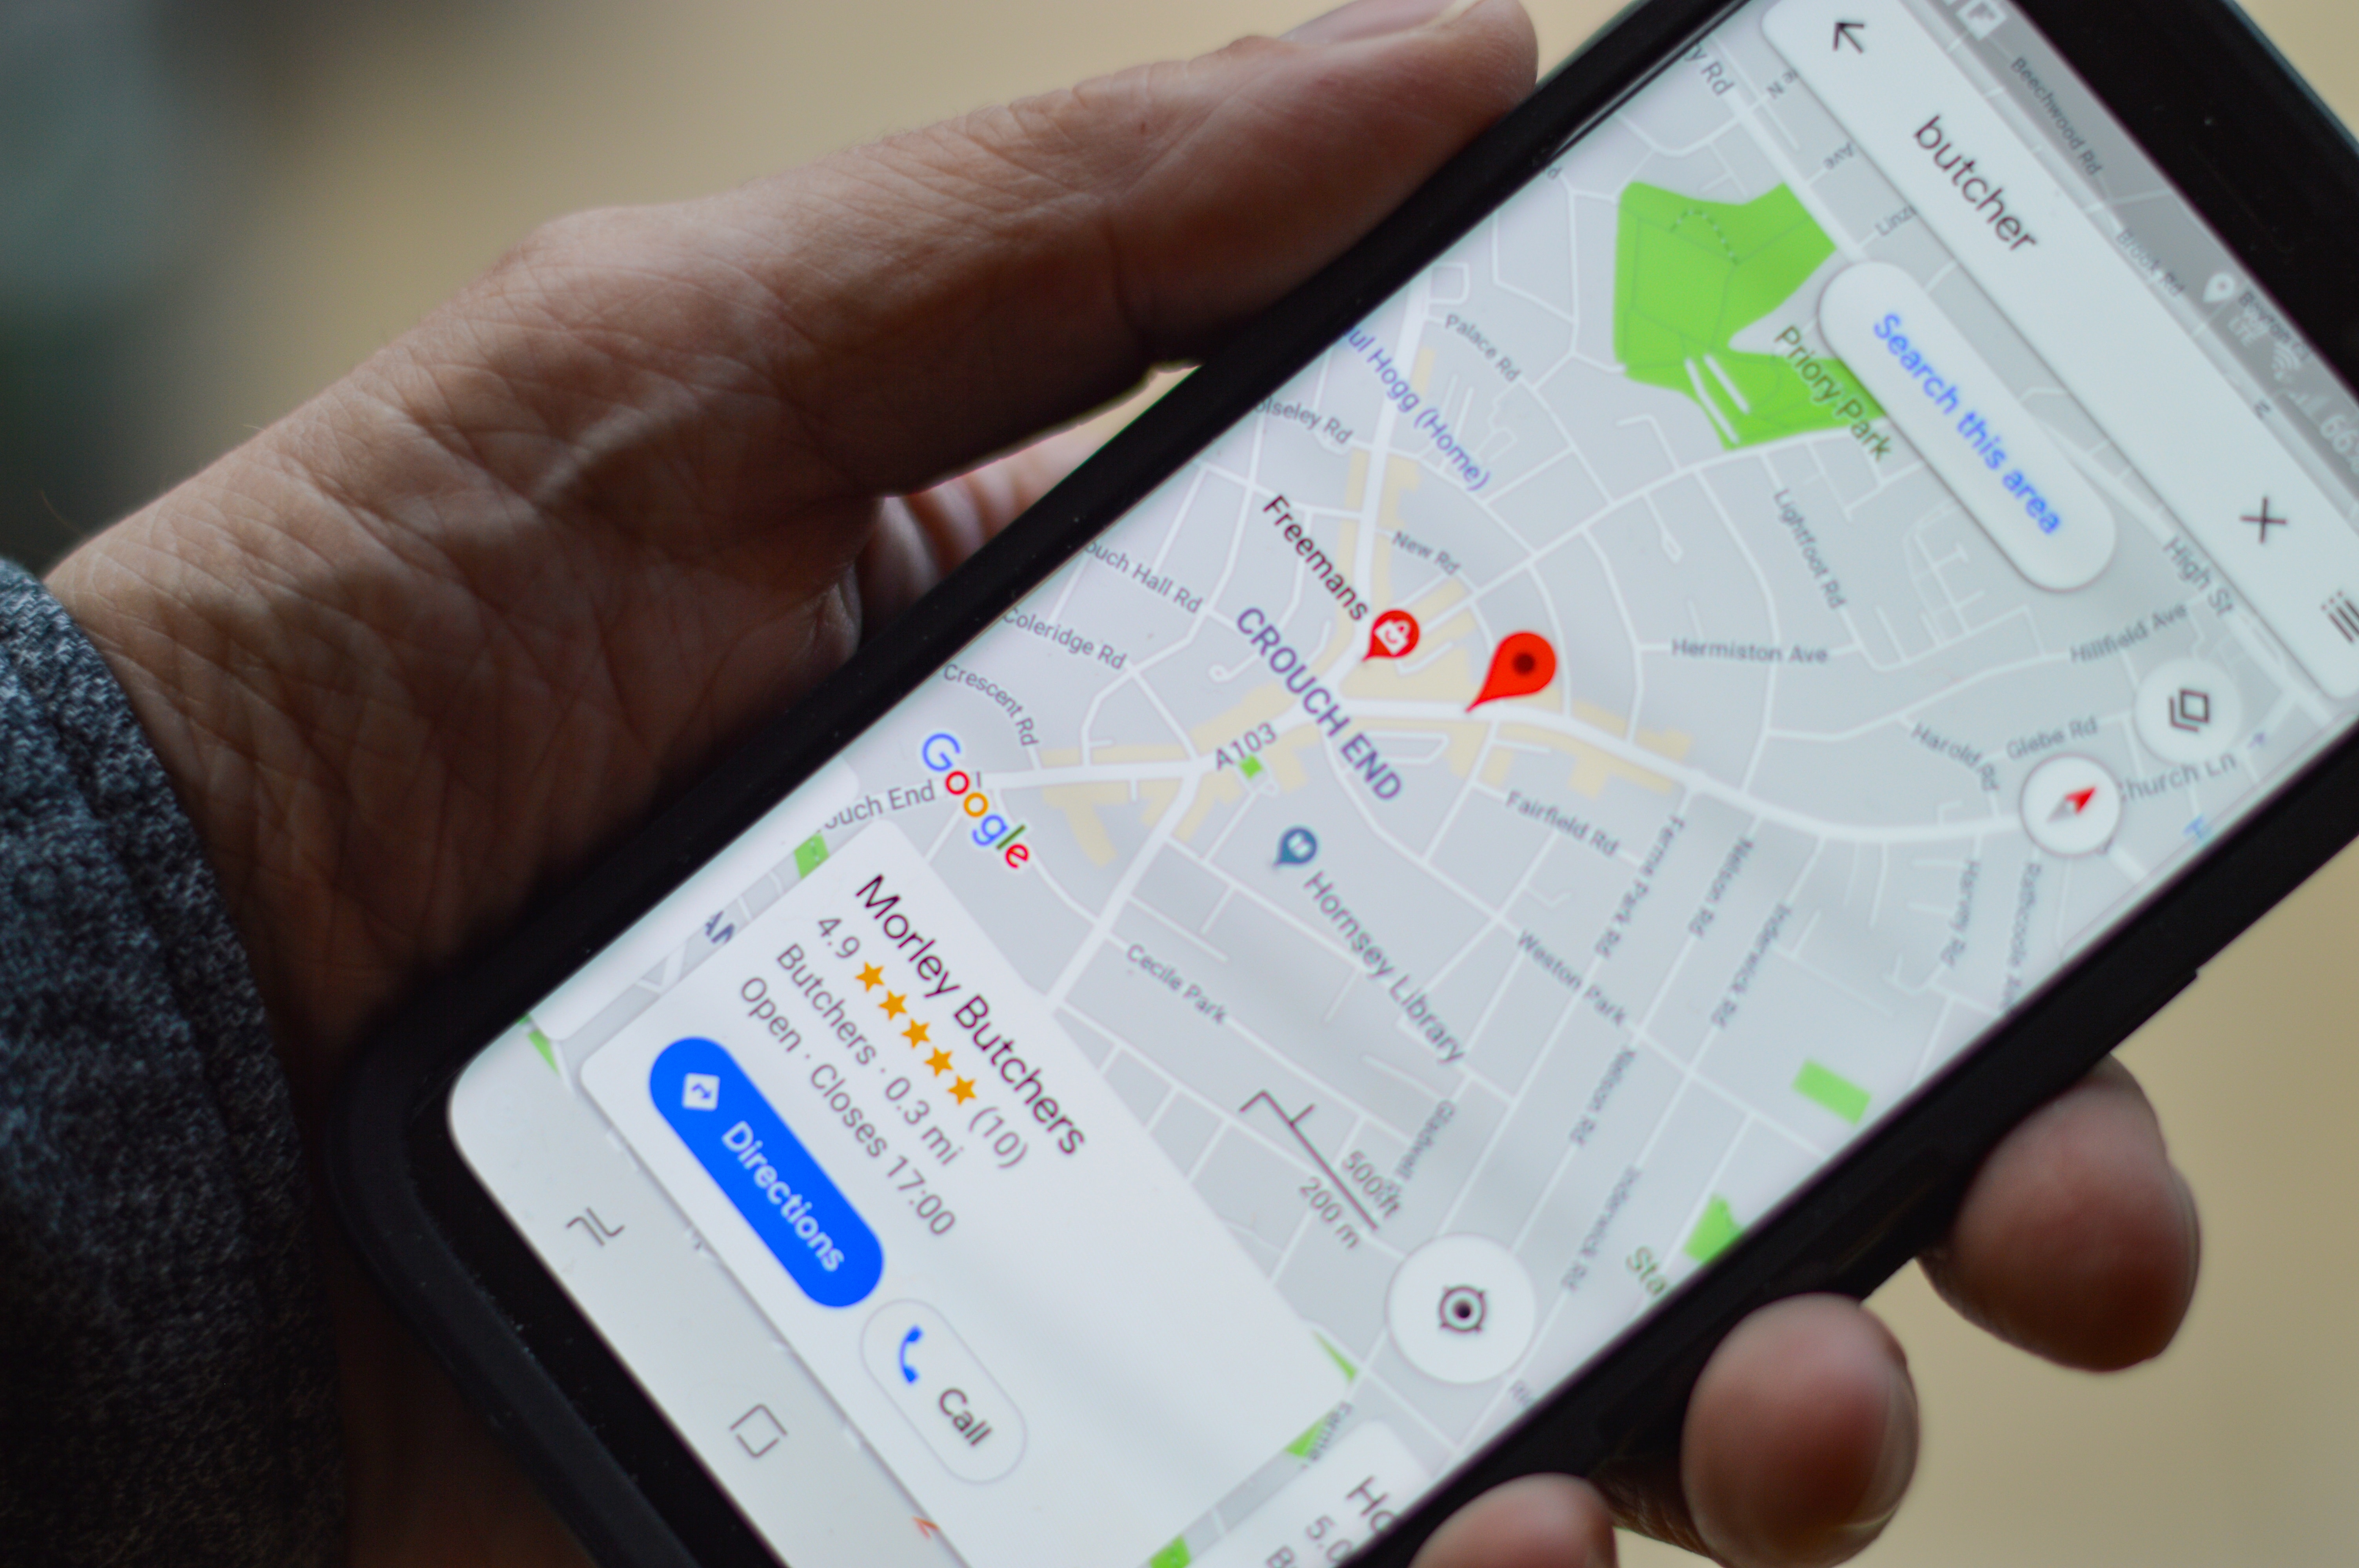 A Guide To Landing More Local Business Clients. The Absolute Necessity Of Being Highly Visible In The Google Maps Local 3-Pack